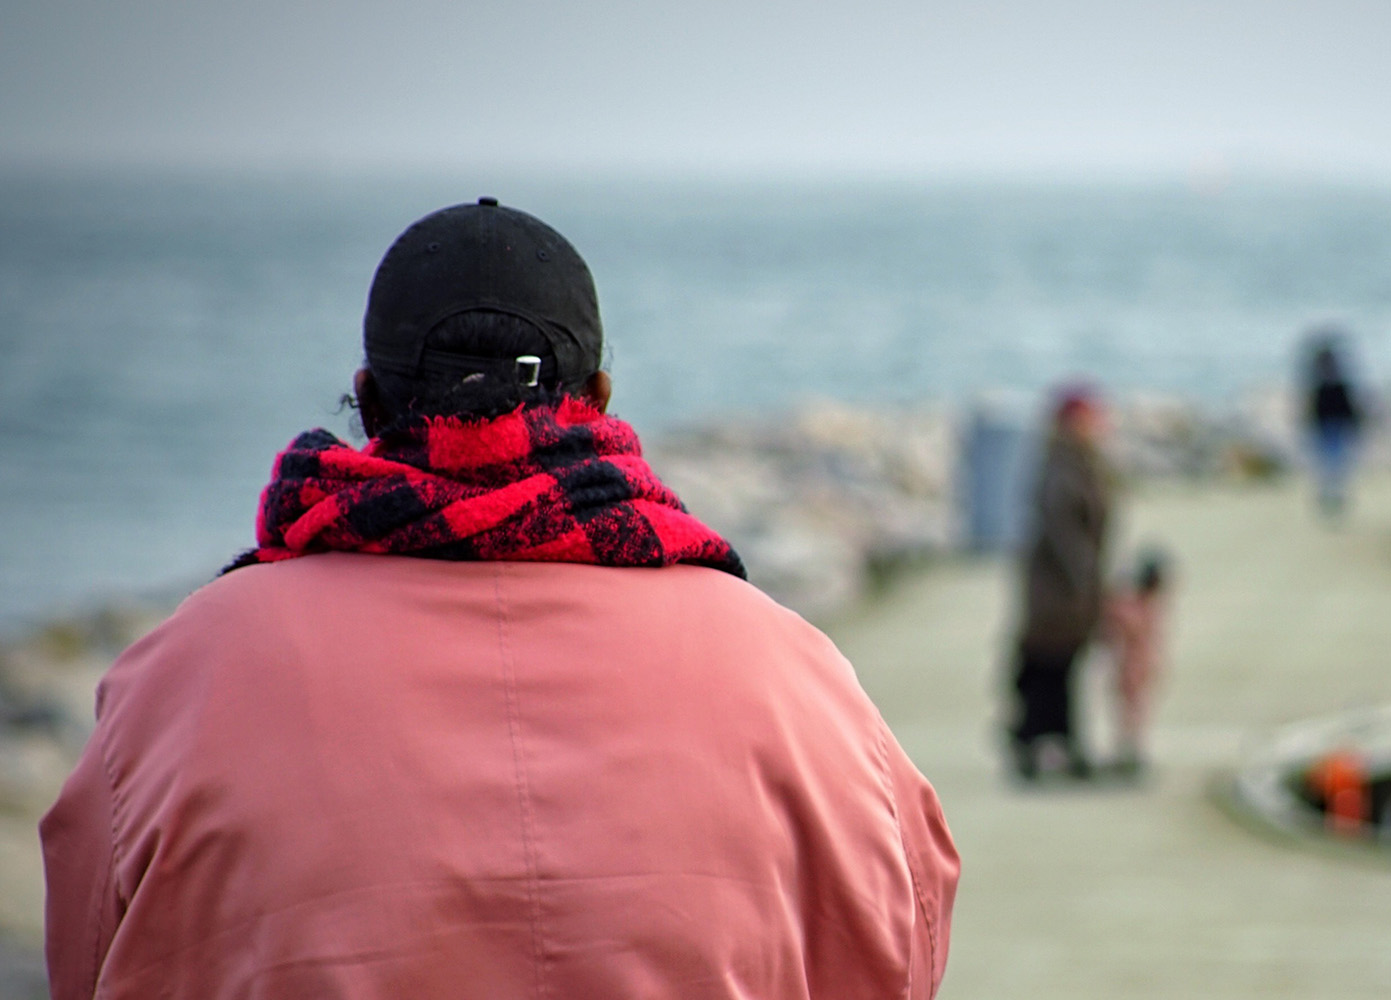 Photo of a person in pink, looking out over other blurred people along a pier.